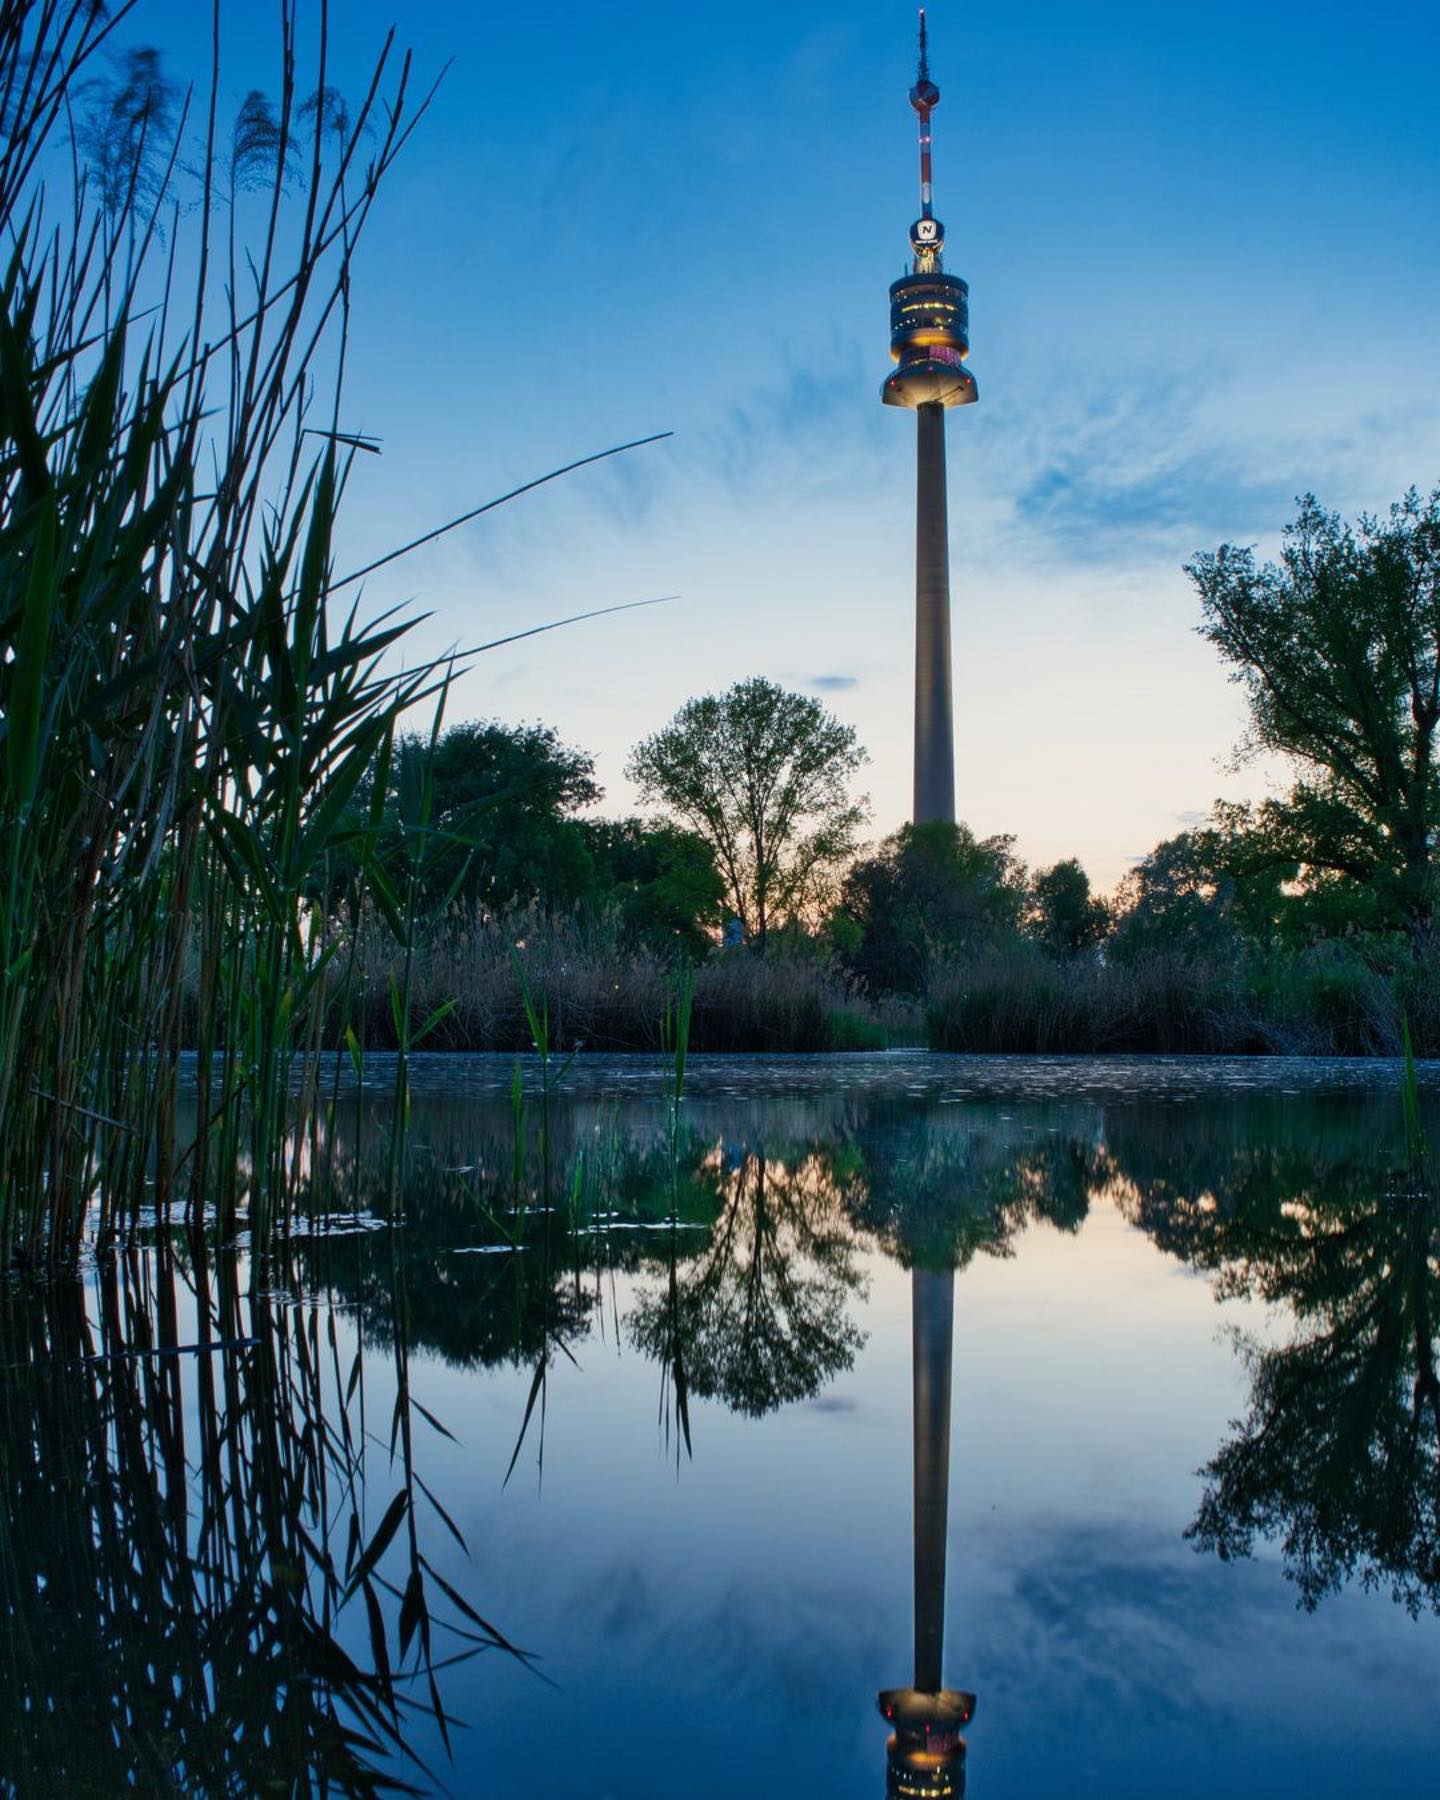 We are located in beautiful surrounding by 📷 @roessler_photography<br />
.<br />
.<br />
.<br />
.<br />
#blauestunde #landschaftsfotografie #sonnenuntergang #architektur #nature #natur #wien #donaupark #donauturm #see #teich #wasser #wasserspiegelung #spiegelung #landscapefotography 